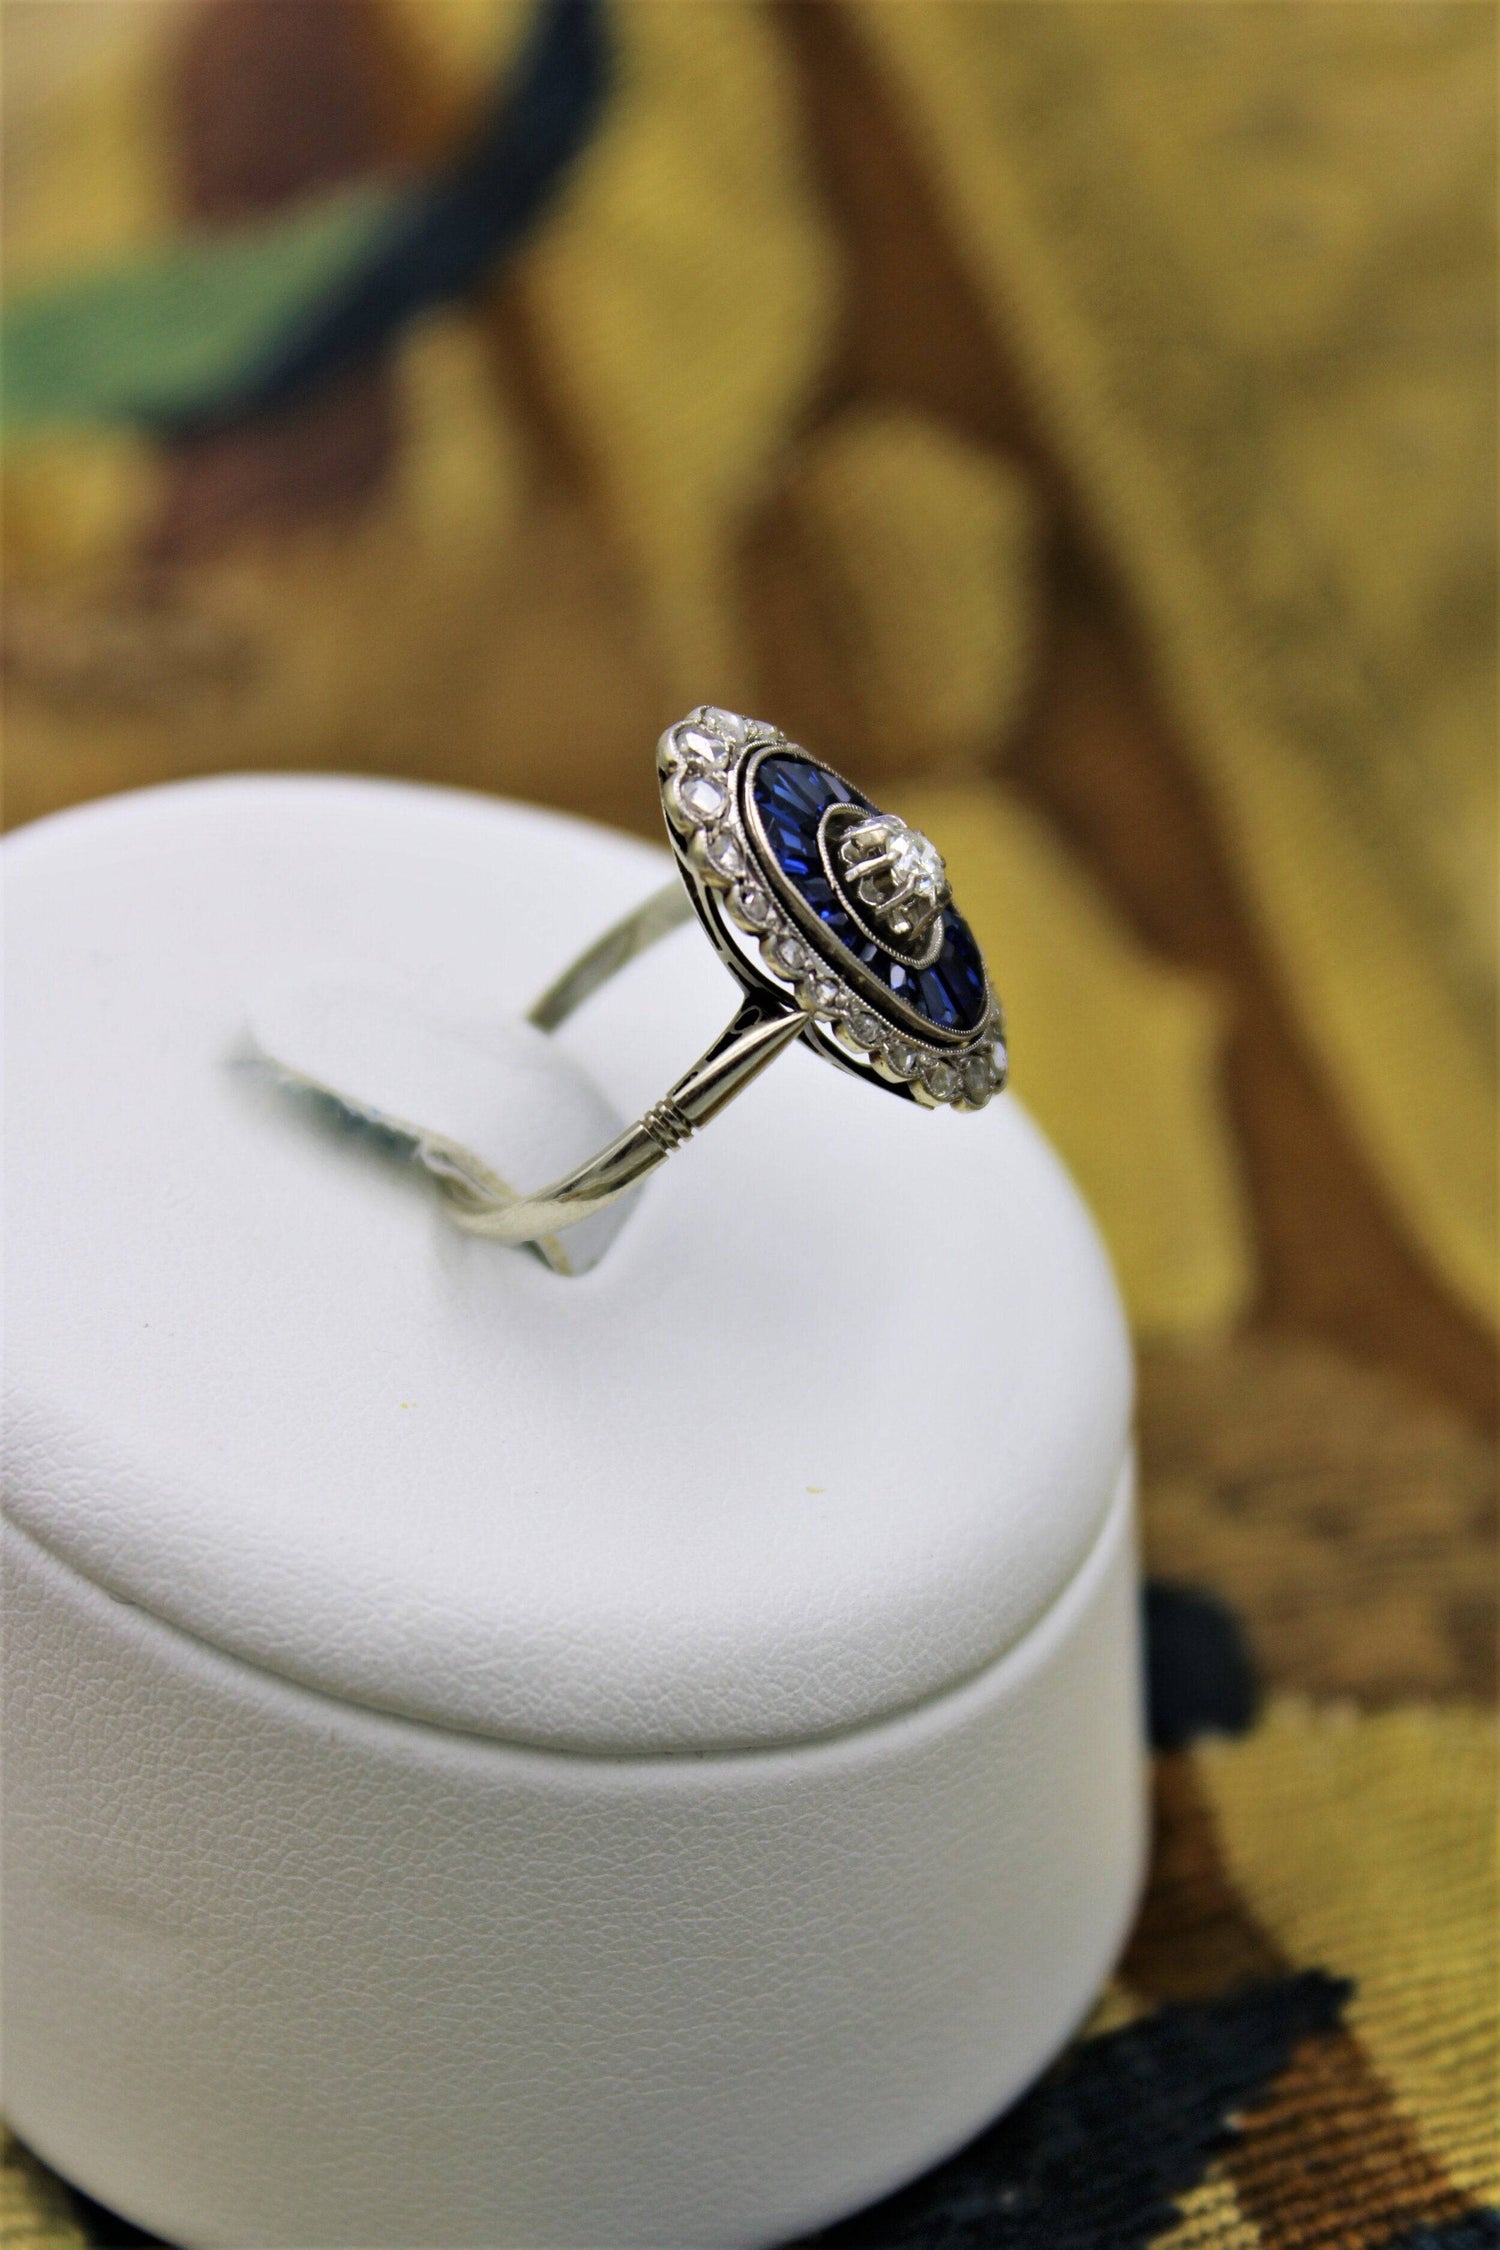 A very fine Art Deco Diamond and Sapphire Floating Ring set in 18ct Yellow Gold & Platinum, French, Circa 1930 - Robin Haydock Antiques